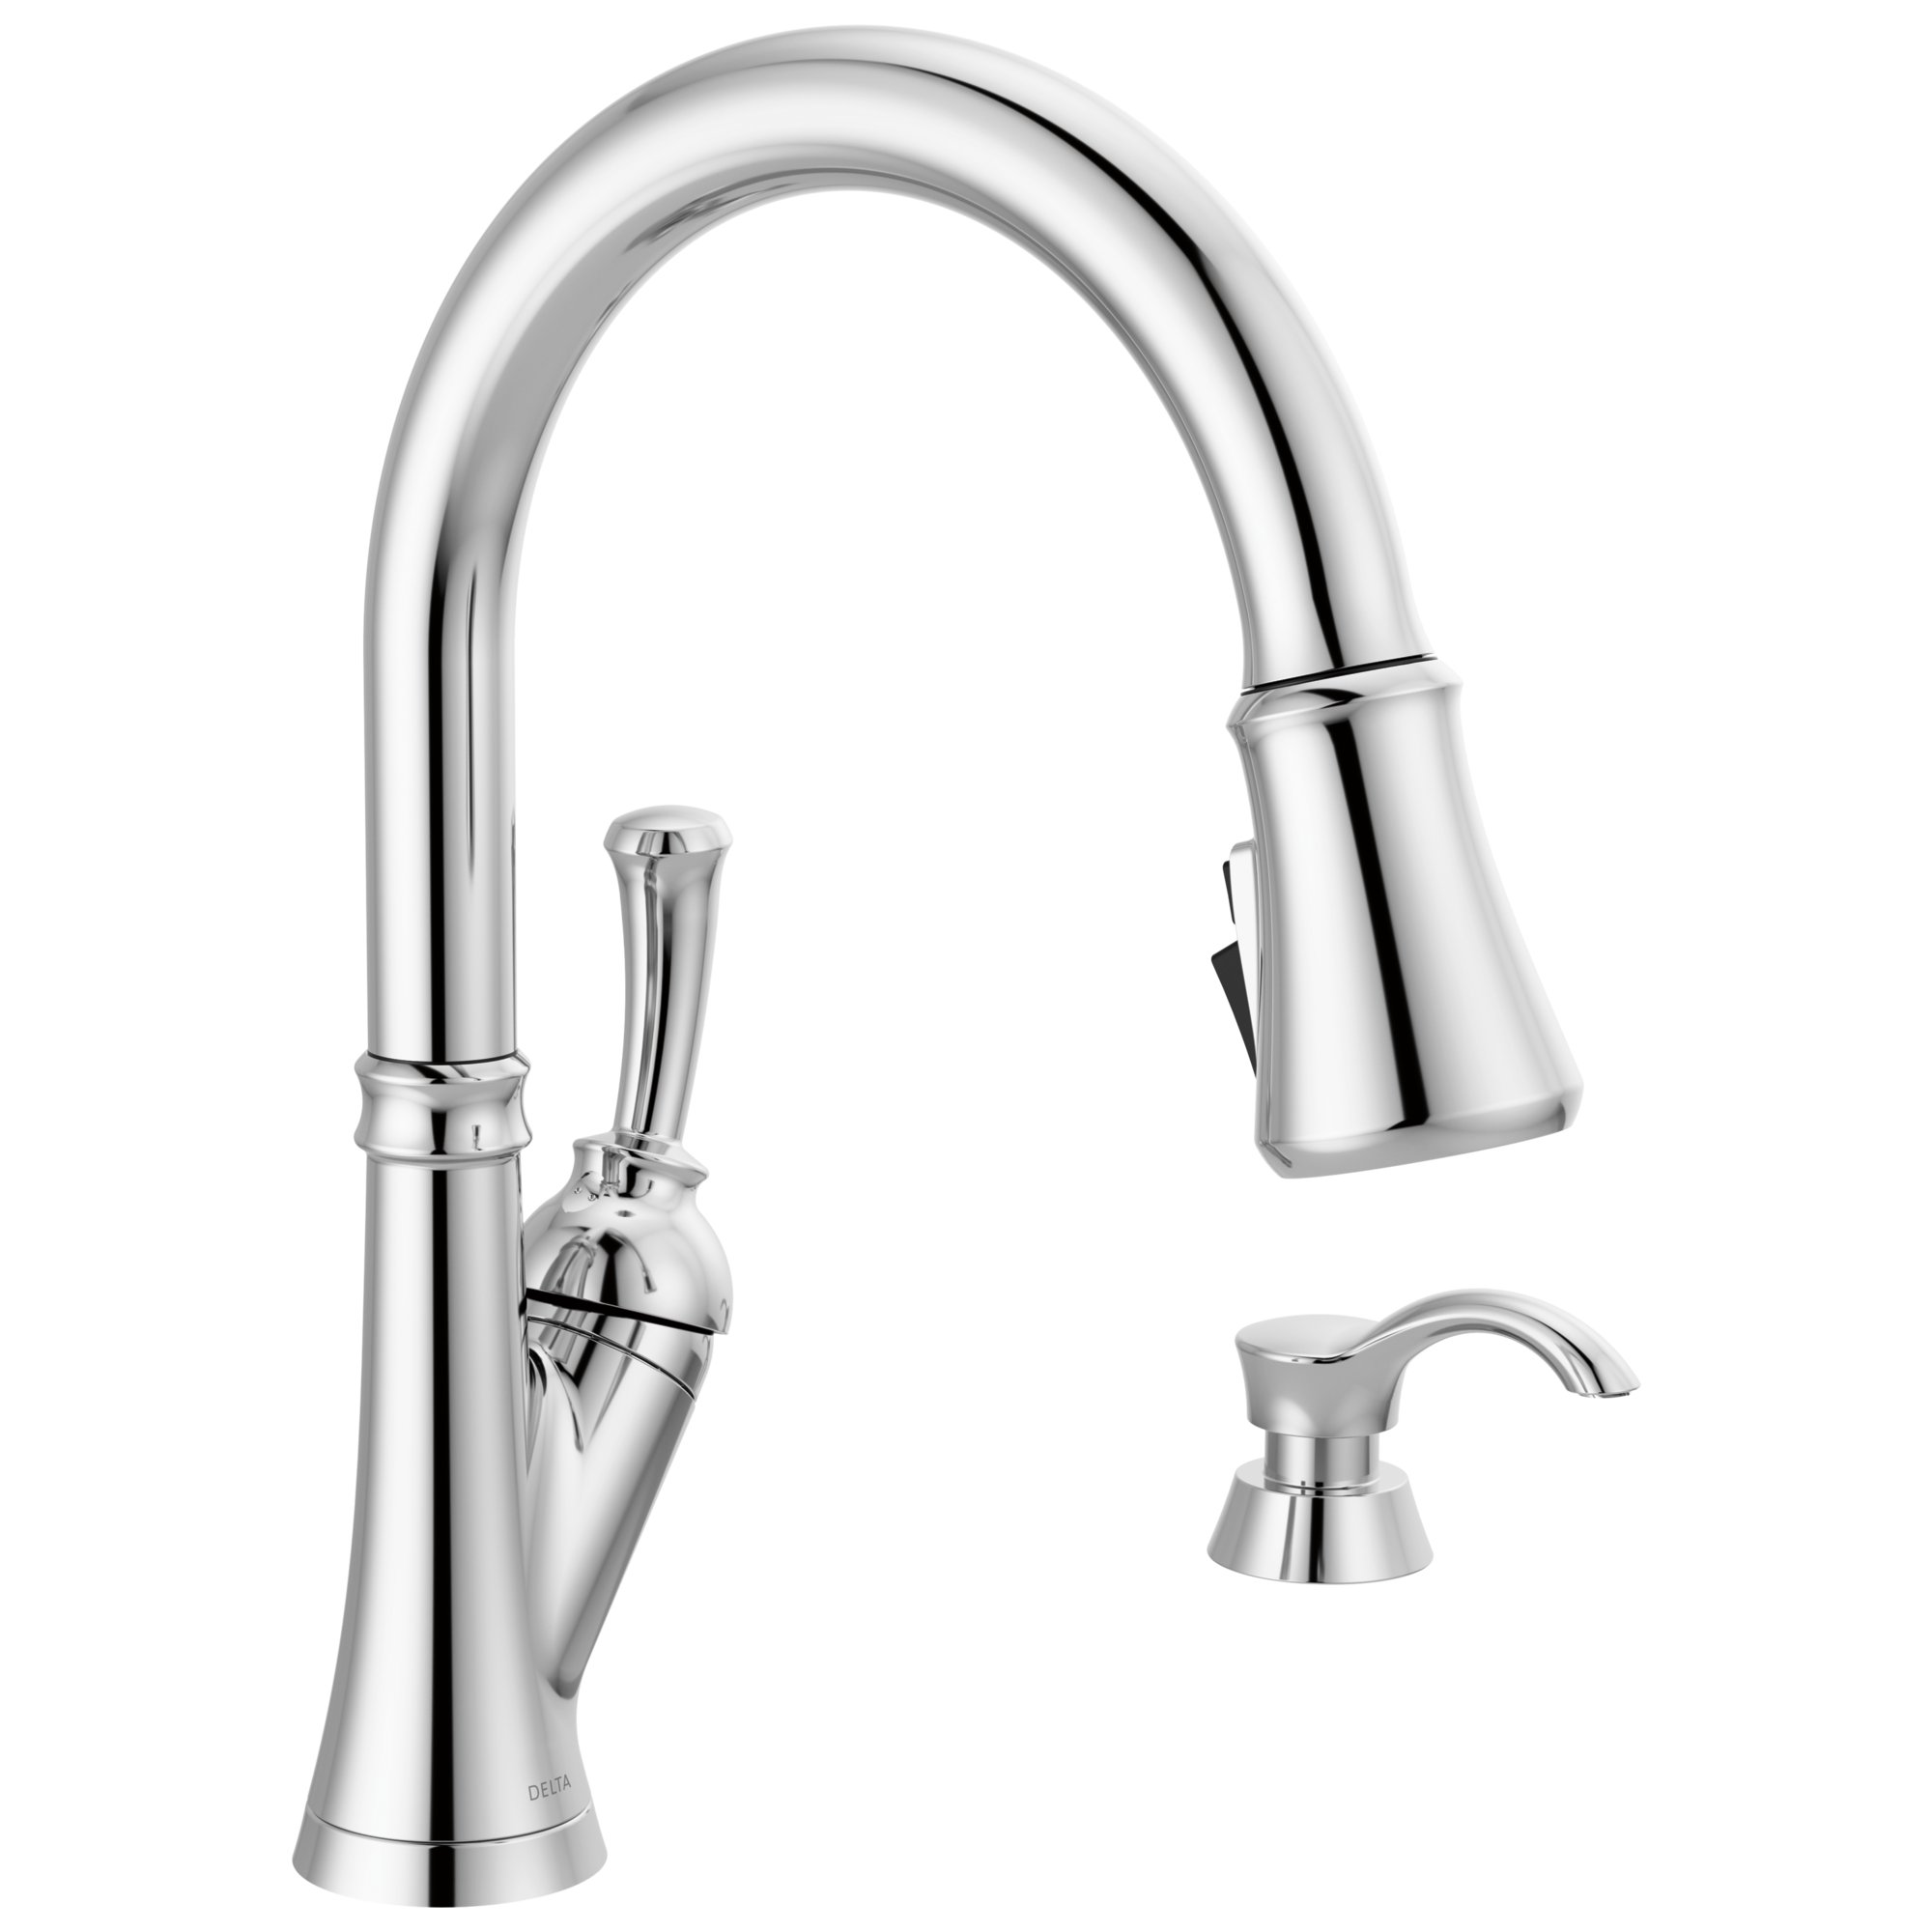 Delta Signature Chrome Finish Single Handle Pull-out Spray Kitchen Faucet 416873 for sale online 